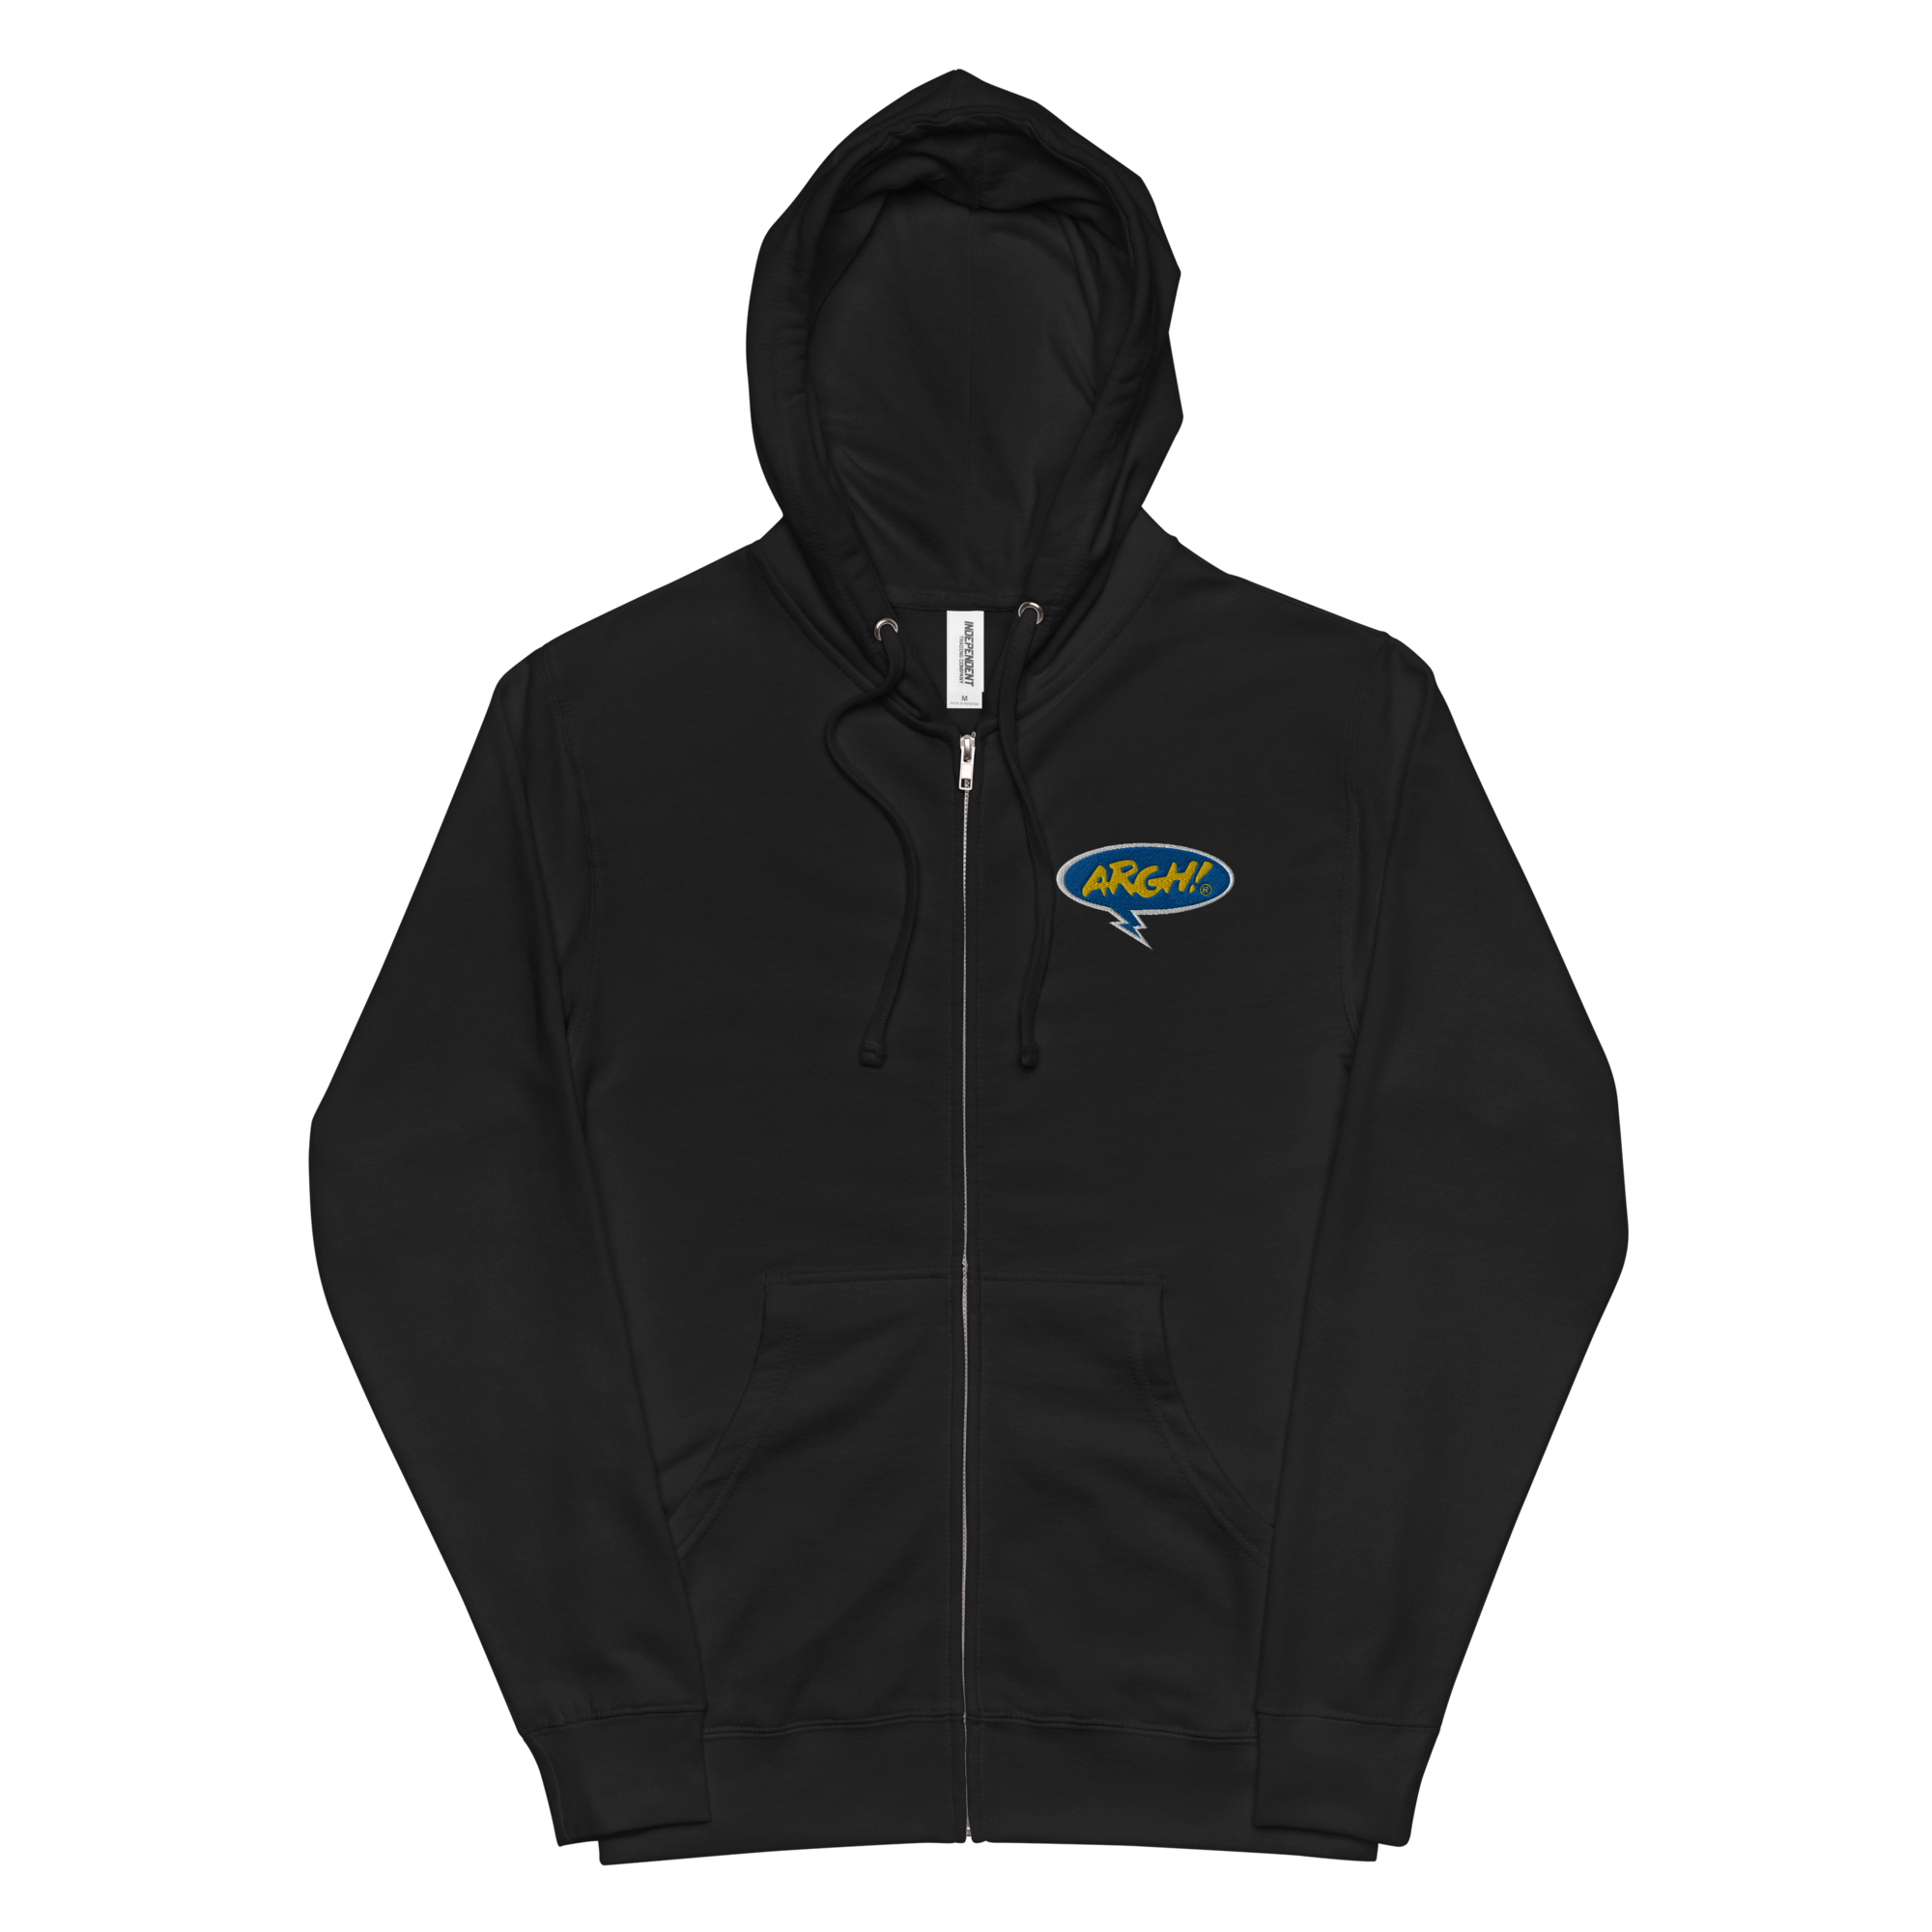 ARGH! Embroidery Zip Up HoodieARGH! Embroidery Zip Up Hoodie. With its soft, premium quality fleece fabric and jersey-lined hood, this unisex zip-up hoodie will be a cozy addition to your outfit. Pair it with jeans, shorts, a skirt, or a dress to stay war